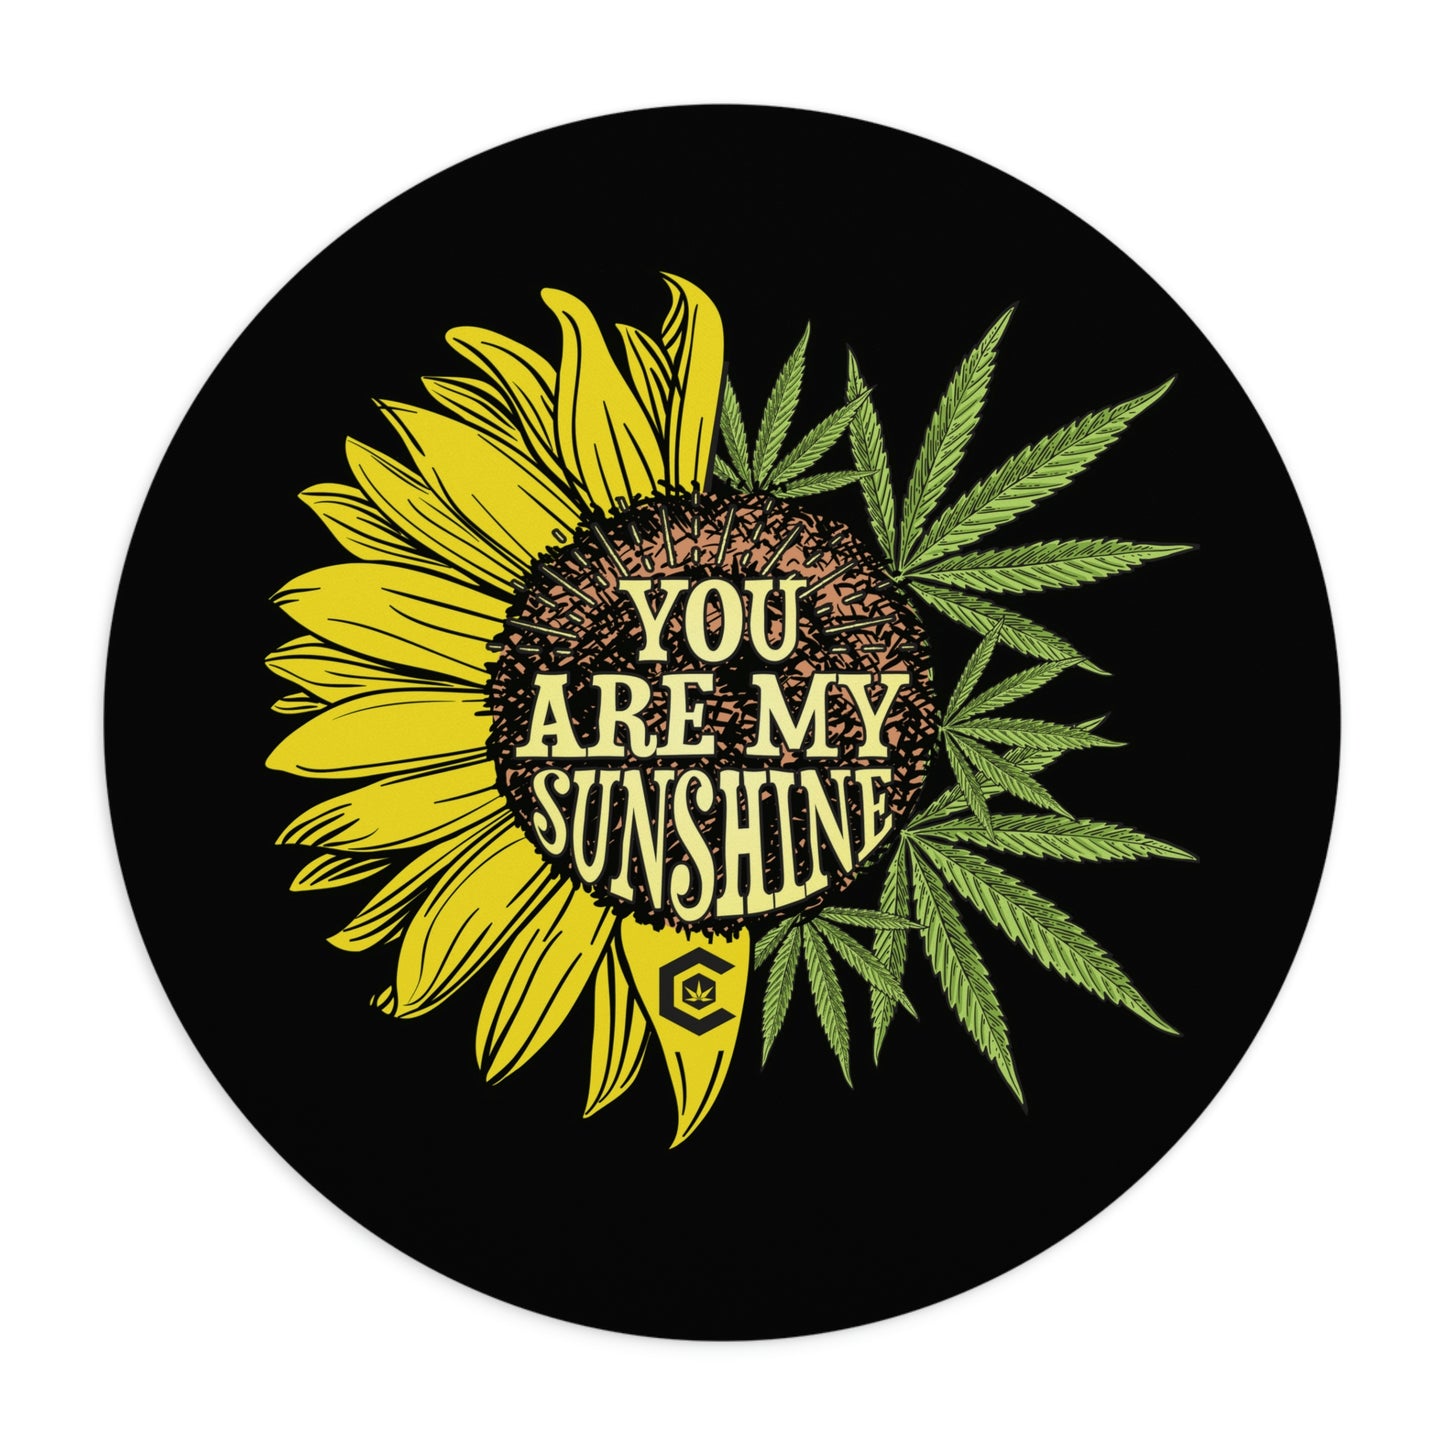 A magnificent circle You Are My Sunshine Mouse Pad that has a cool sunflower and cannabis leaf combined design to form a complete flower showing the words you are my sunshine in the middle.